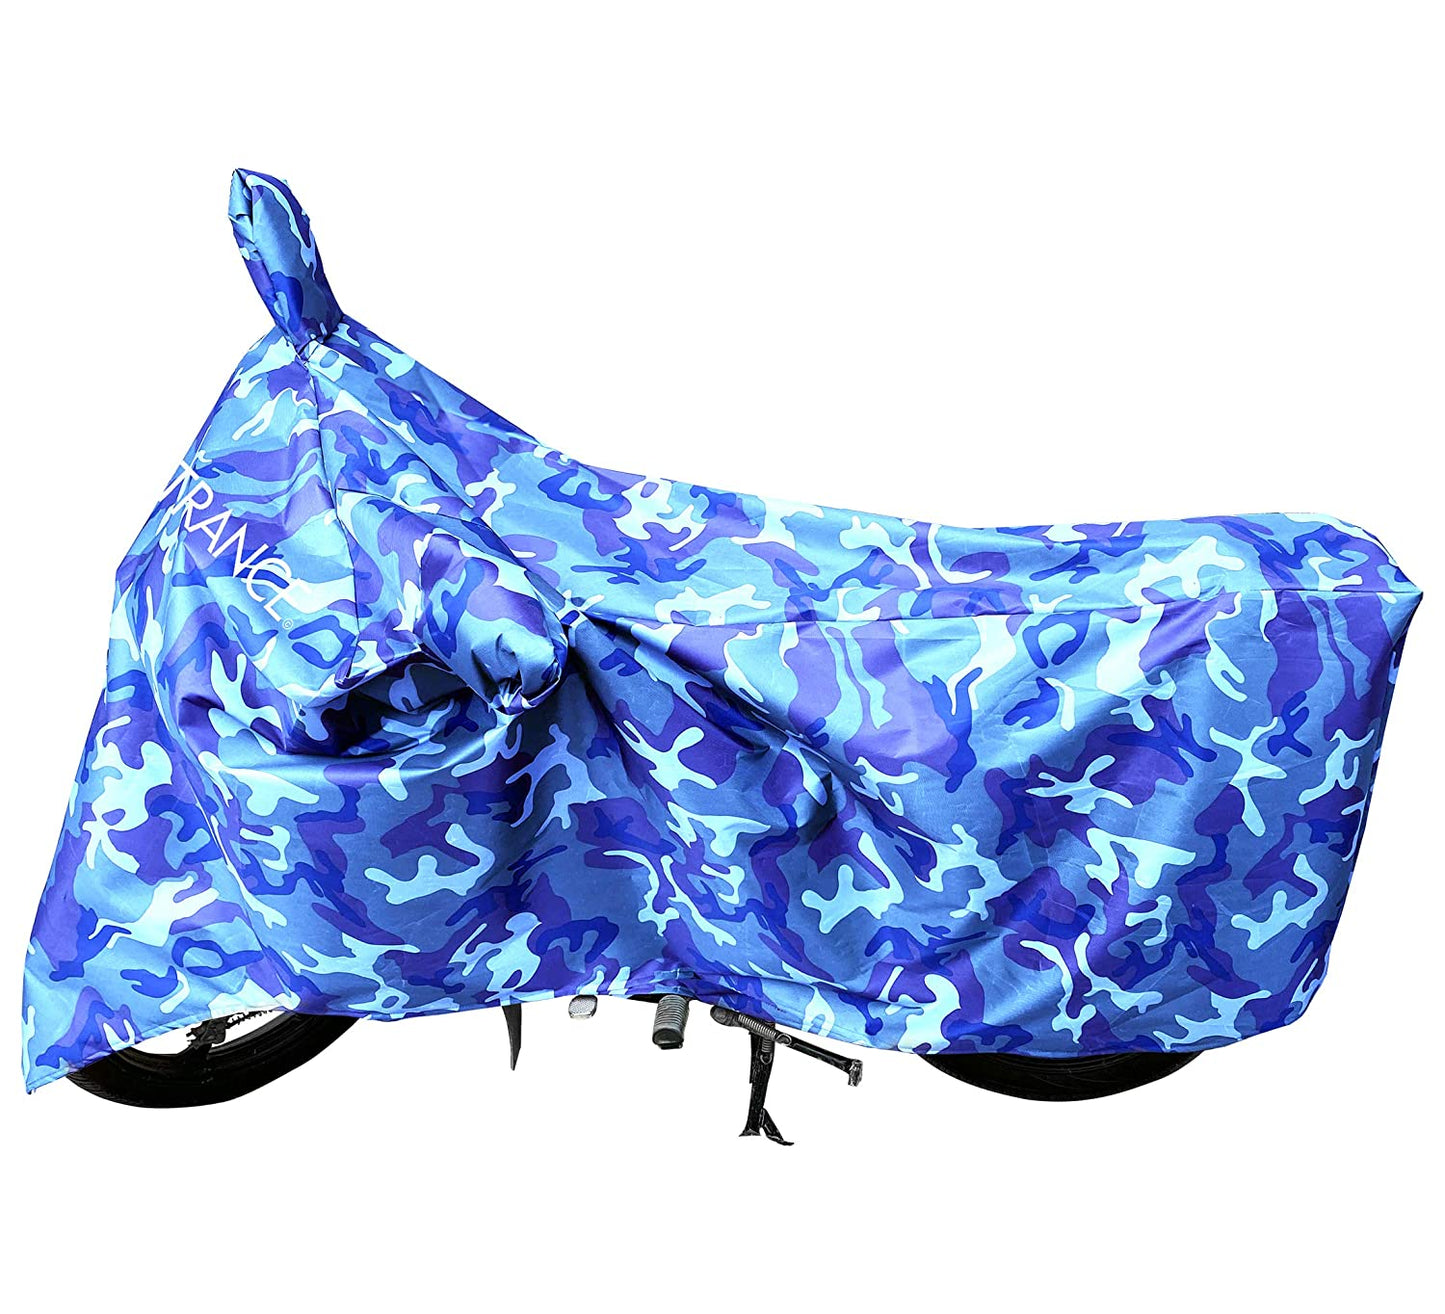 MotoTrance Jungle Bike Body Covers For LML Star Euro 150 - Interlock-Stitched Waterproof and Heat Resistant with Mirror Pockets